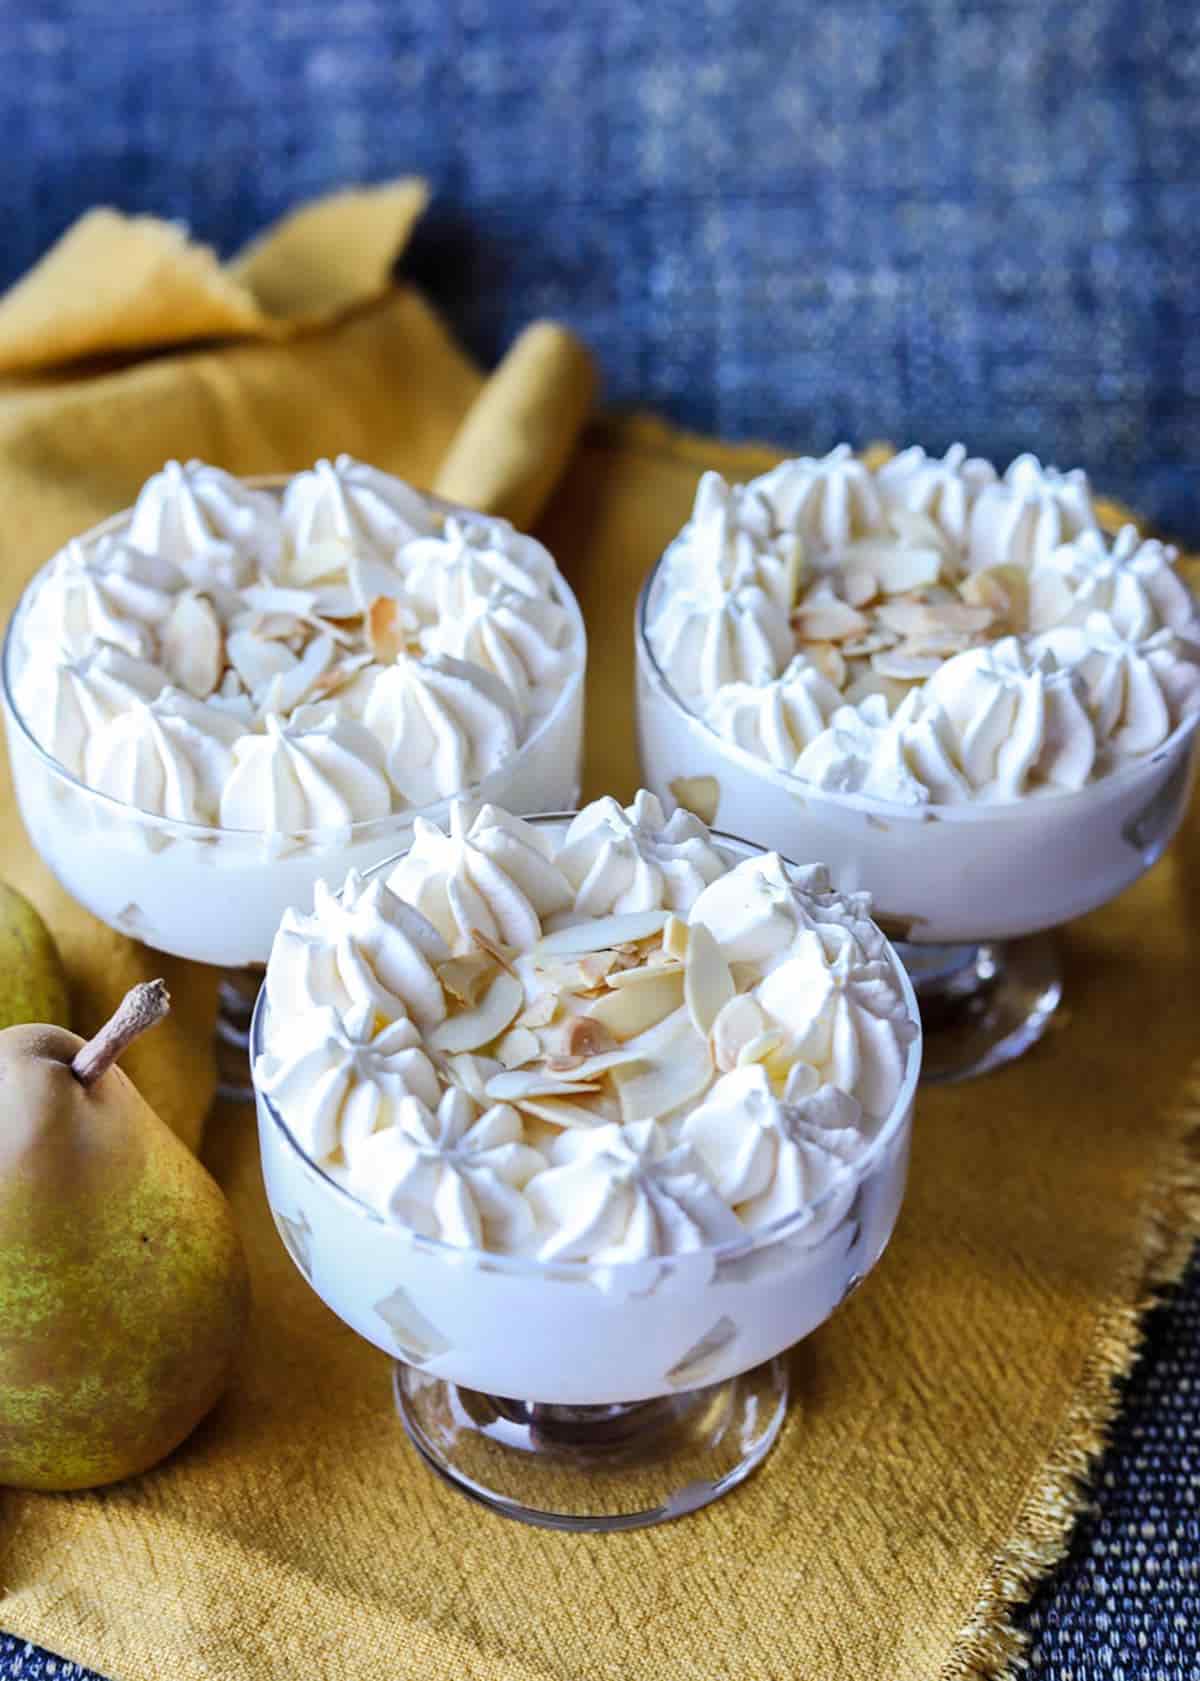 Jamaica Ginger Cake and Pear Trifles with pear